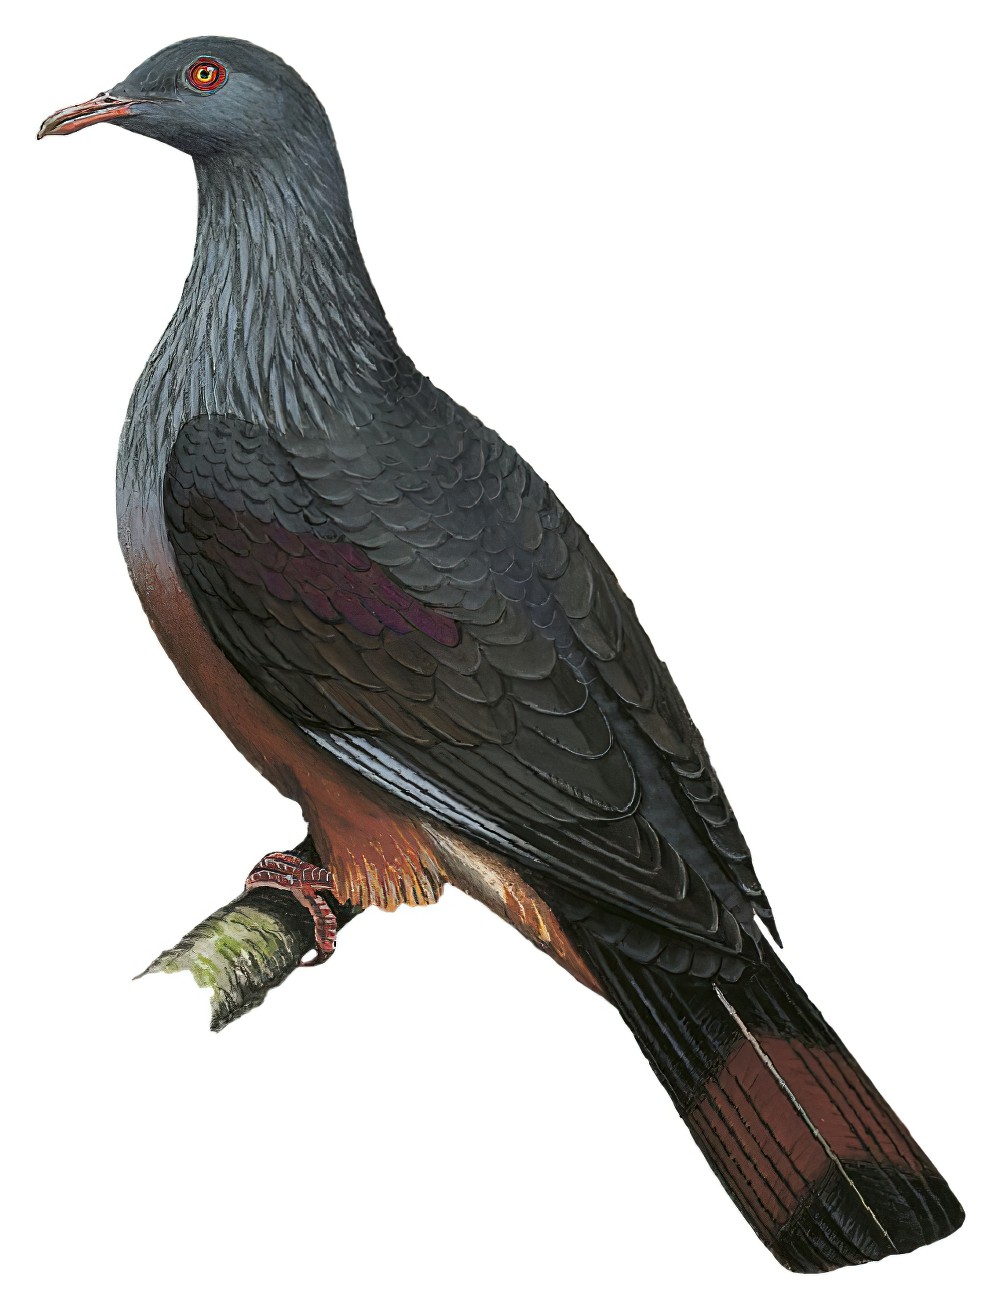 New Caledonian Imperial-Pigeon / Ducula goliath